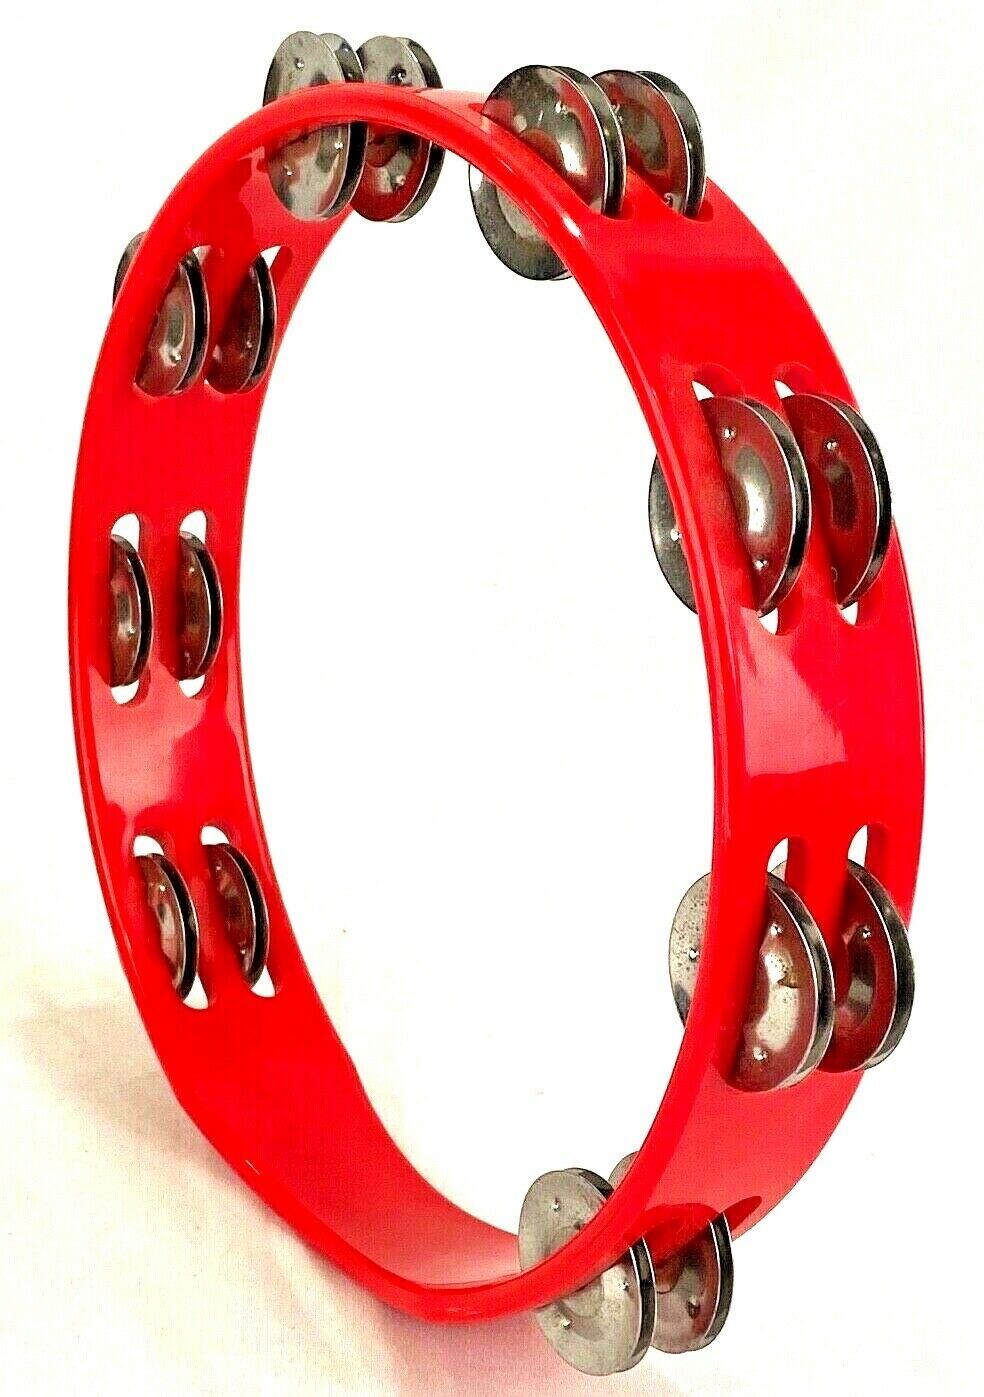 Primary image for Vtg 10" Red Tambourine Percussion Instrument-16 Pair of Double Jangles-Plastic